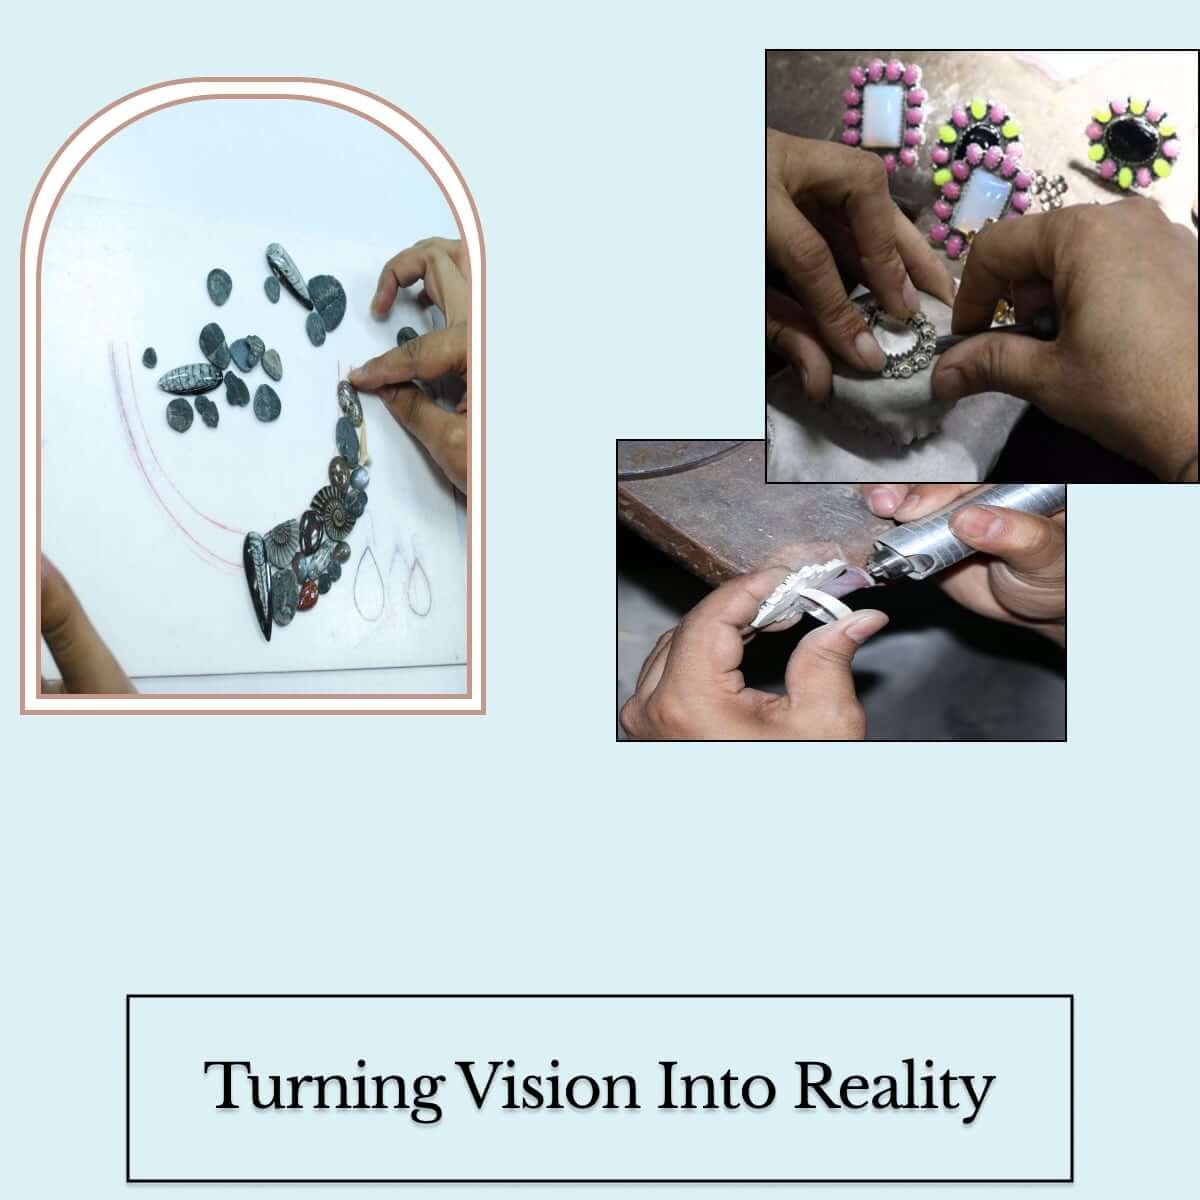 The Process of Transforming Vision into Creation